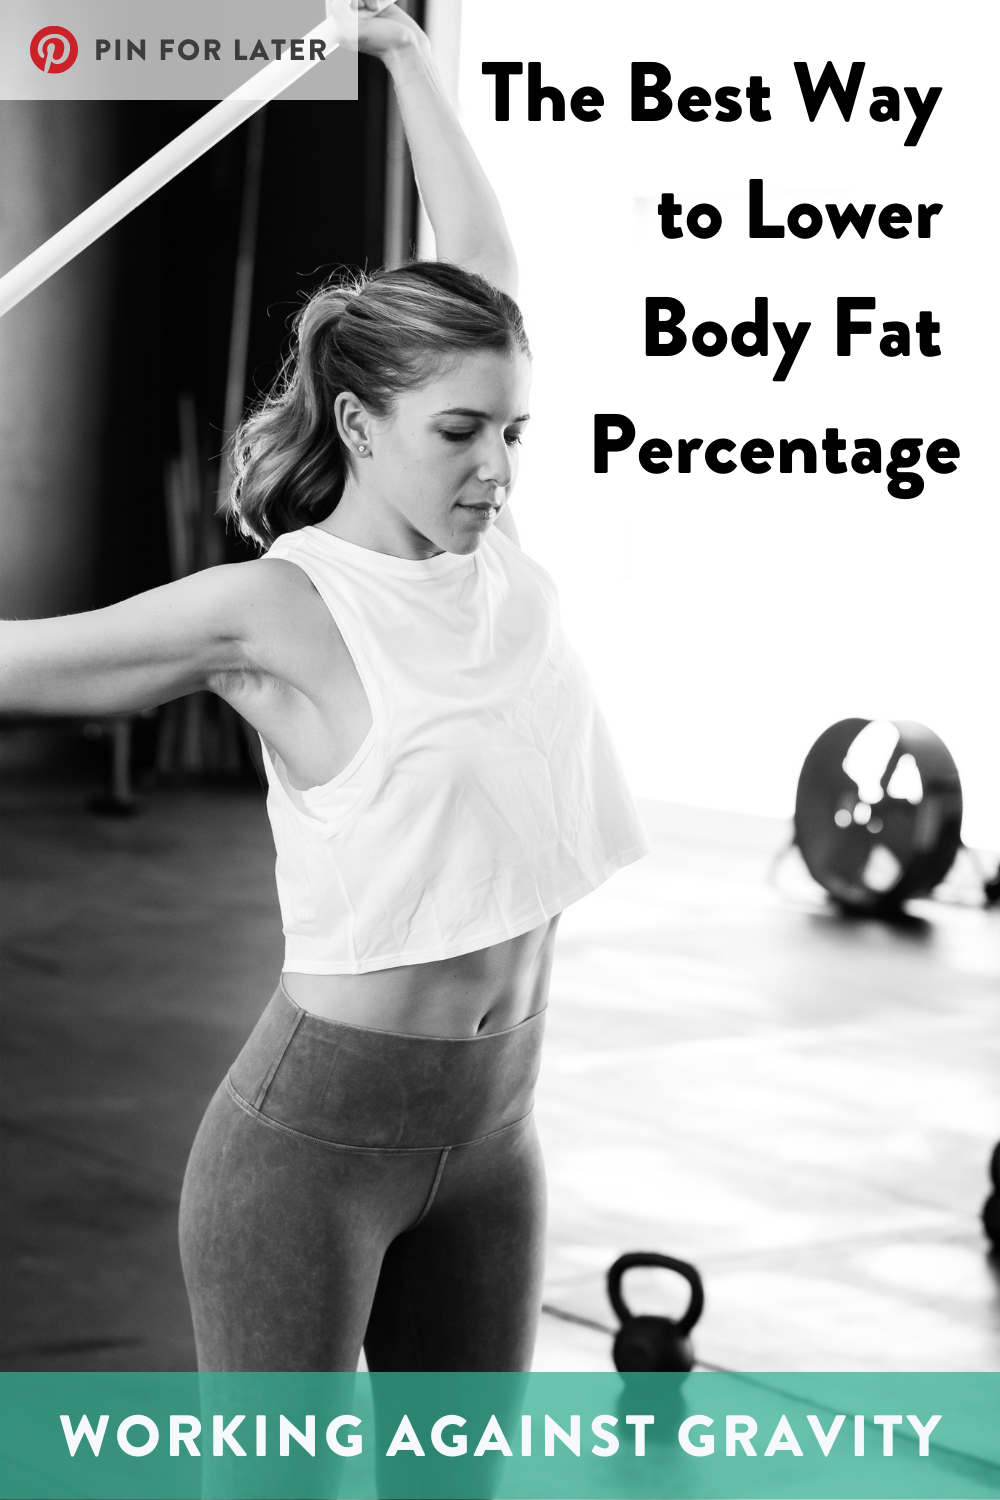 What Is A Good Body Fat Percentage?